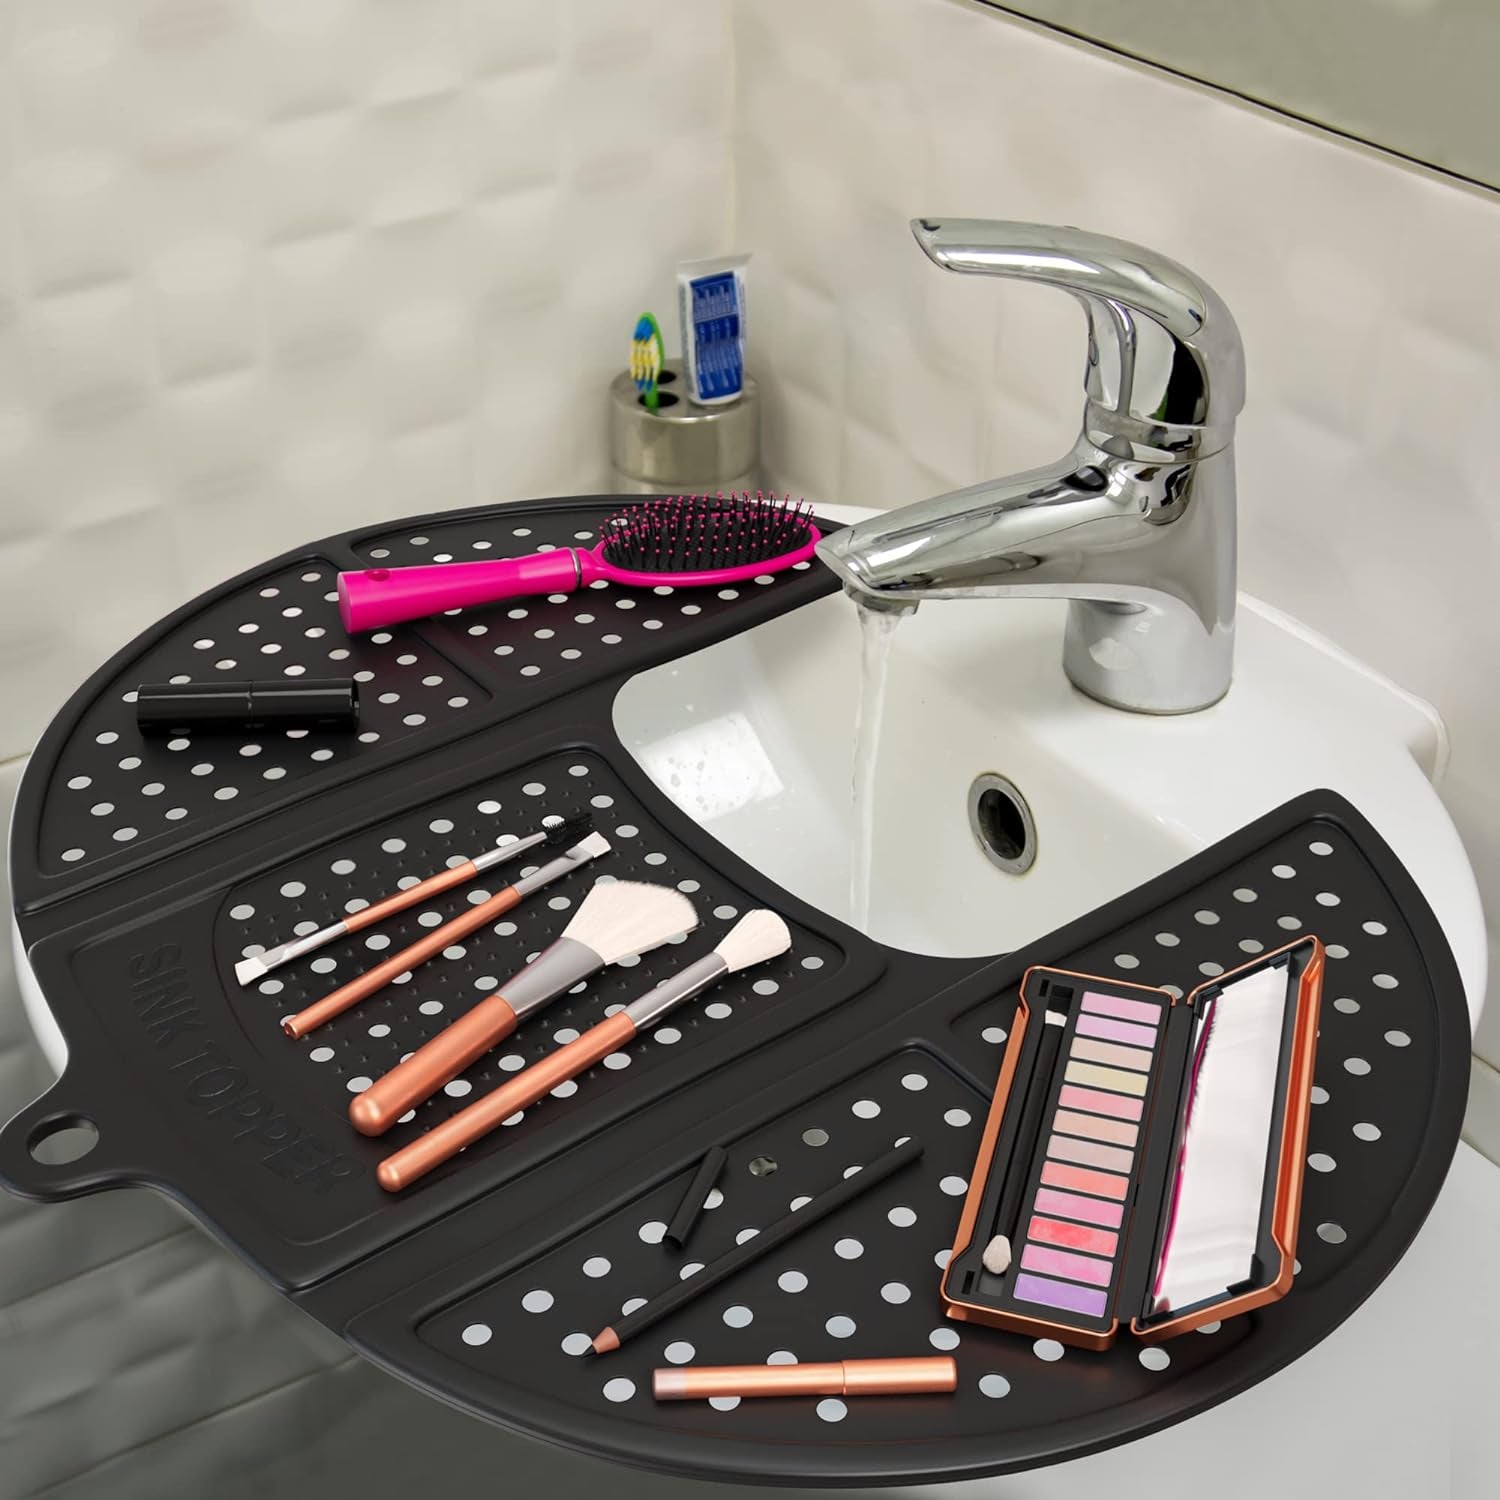 Sink Topper Silicone Beauty Makeup Brush Cleaning Mat